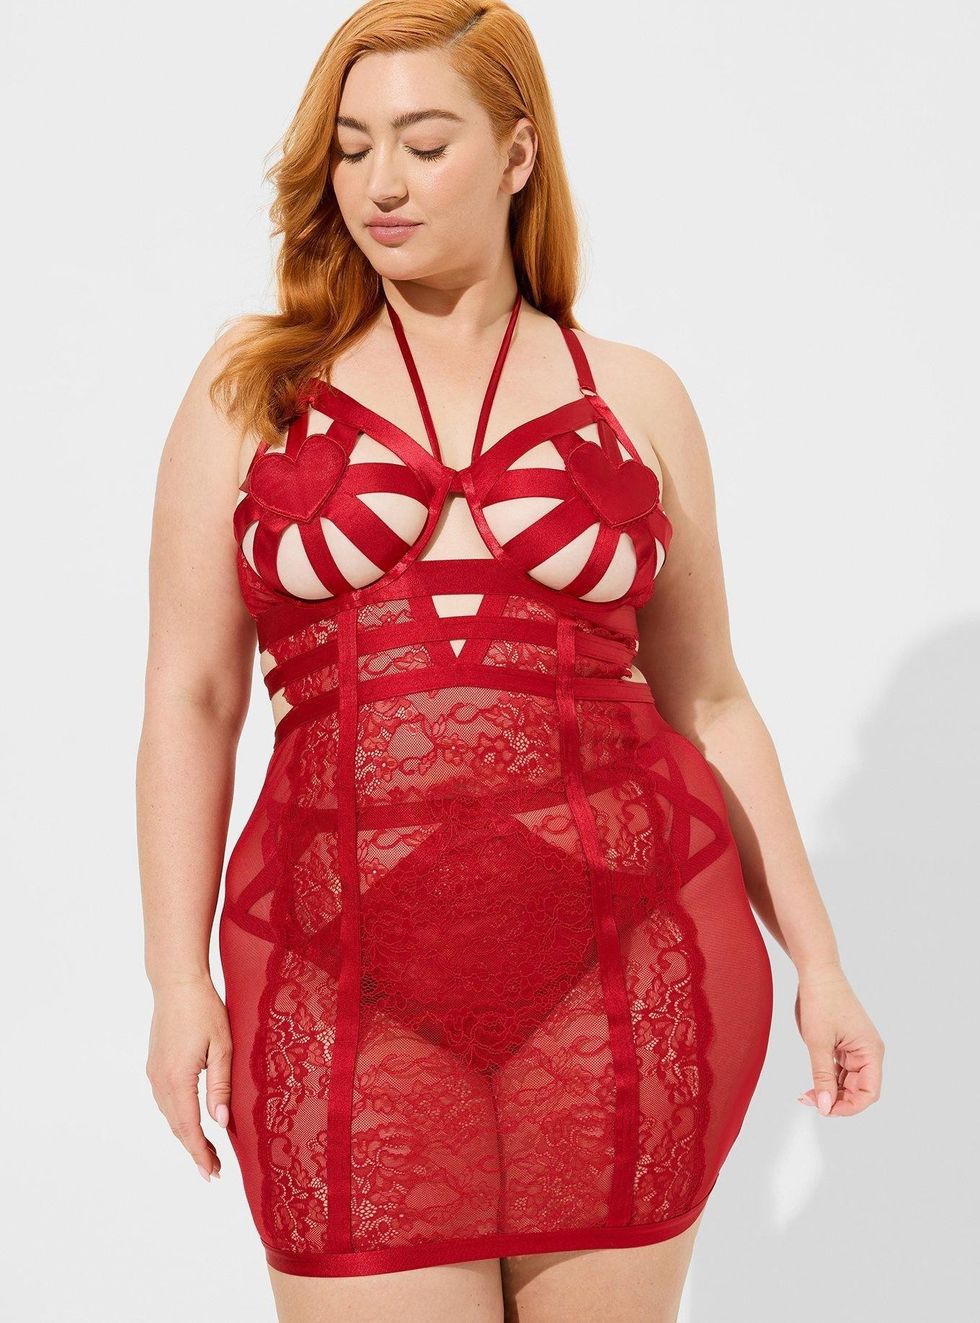 Torrid Strappy Heart Open Cup Chemise